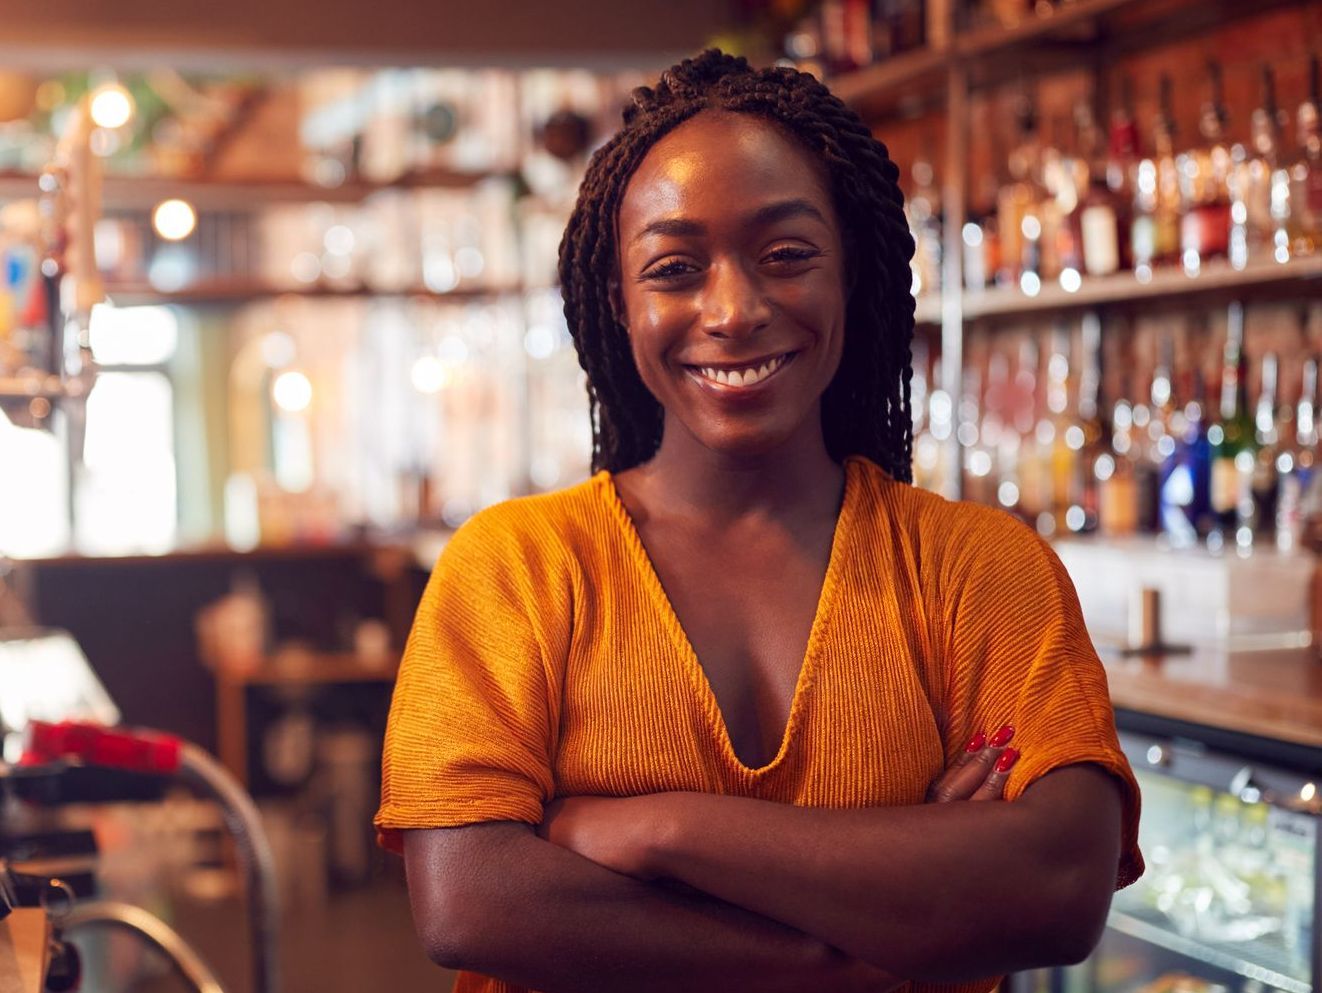 Lady smiling behind a bar